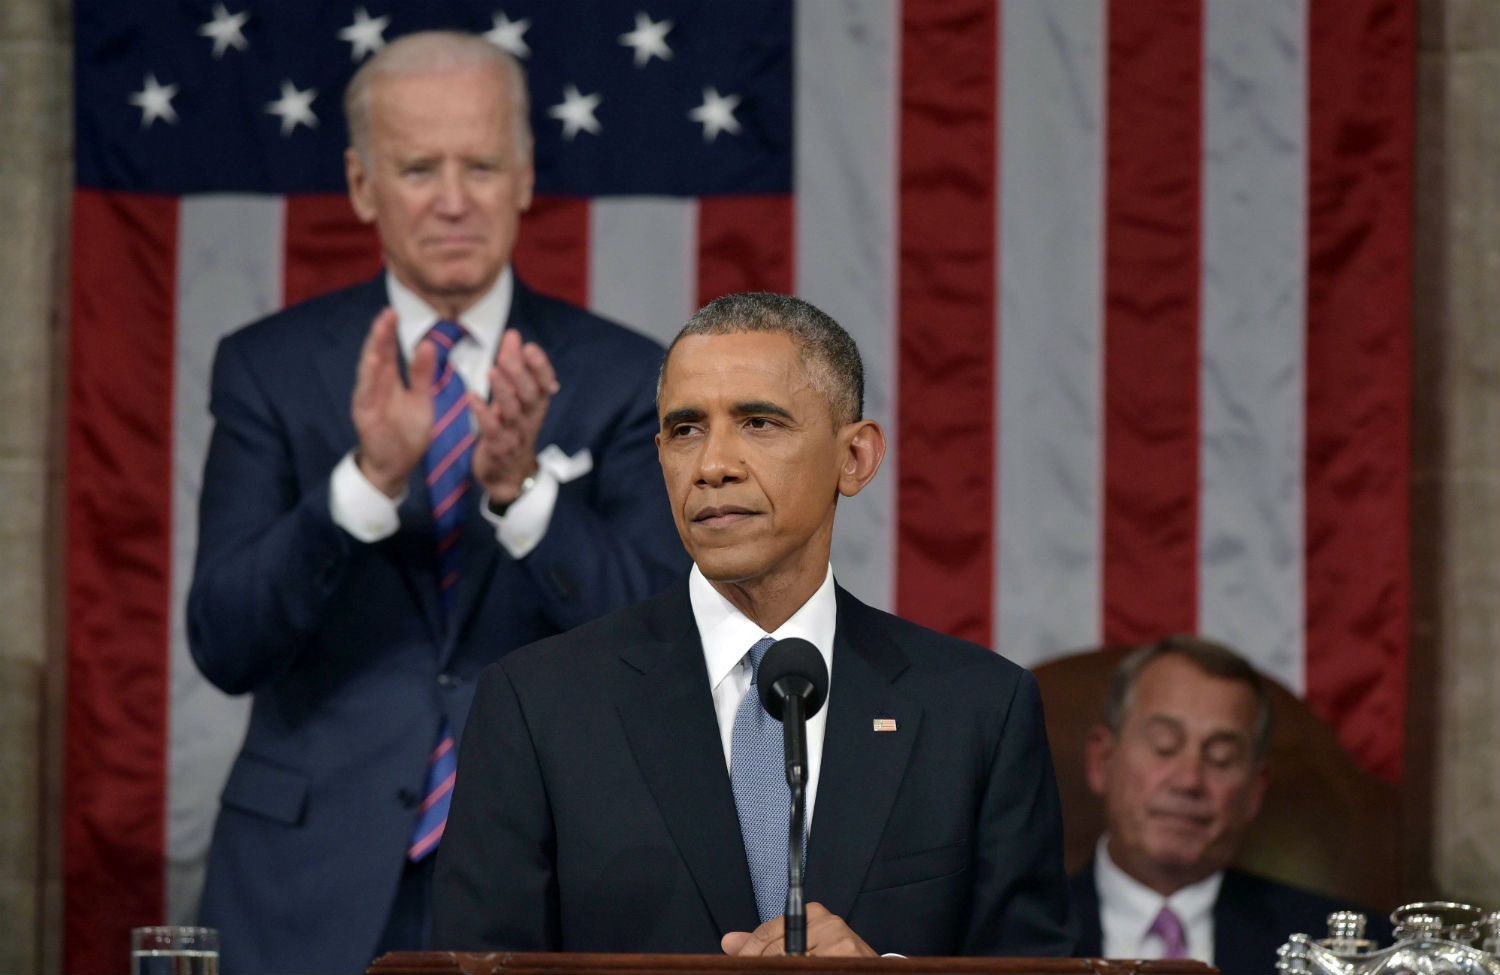 Democrats Pan Obama’s Trade Talk in His State of the Union